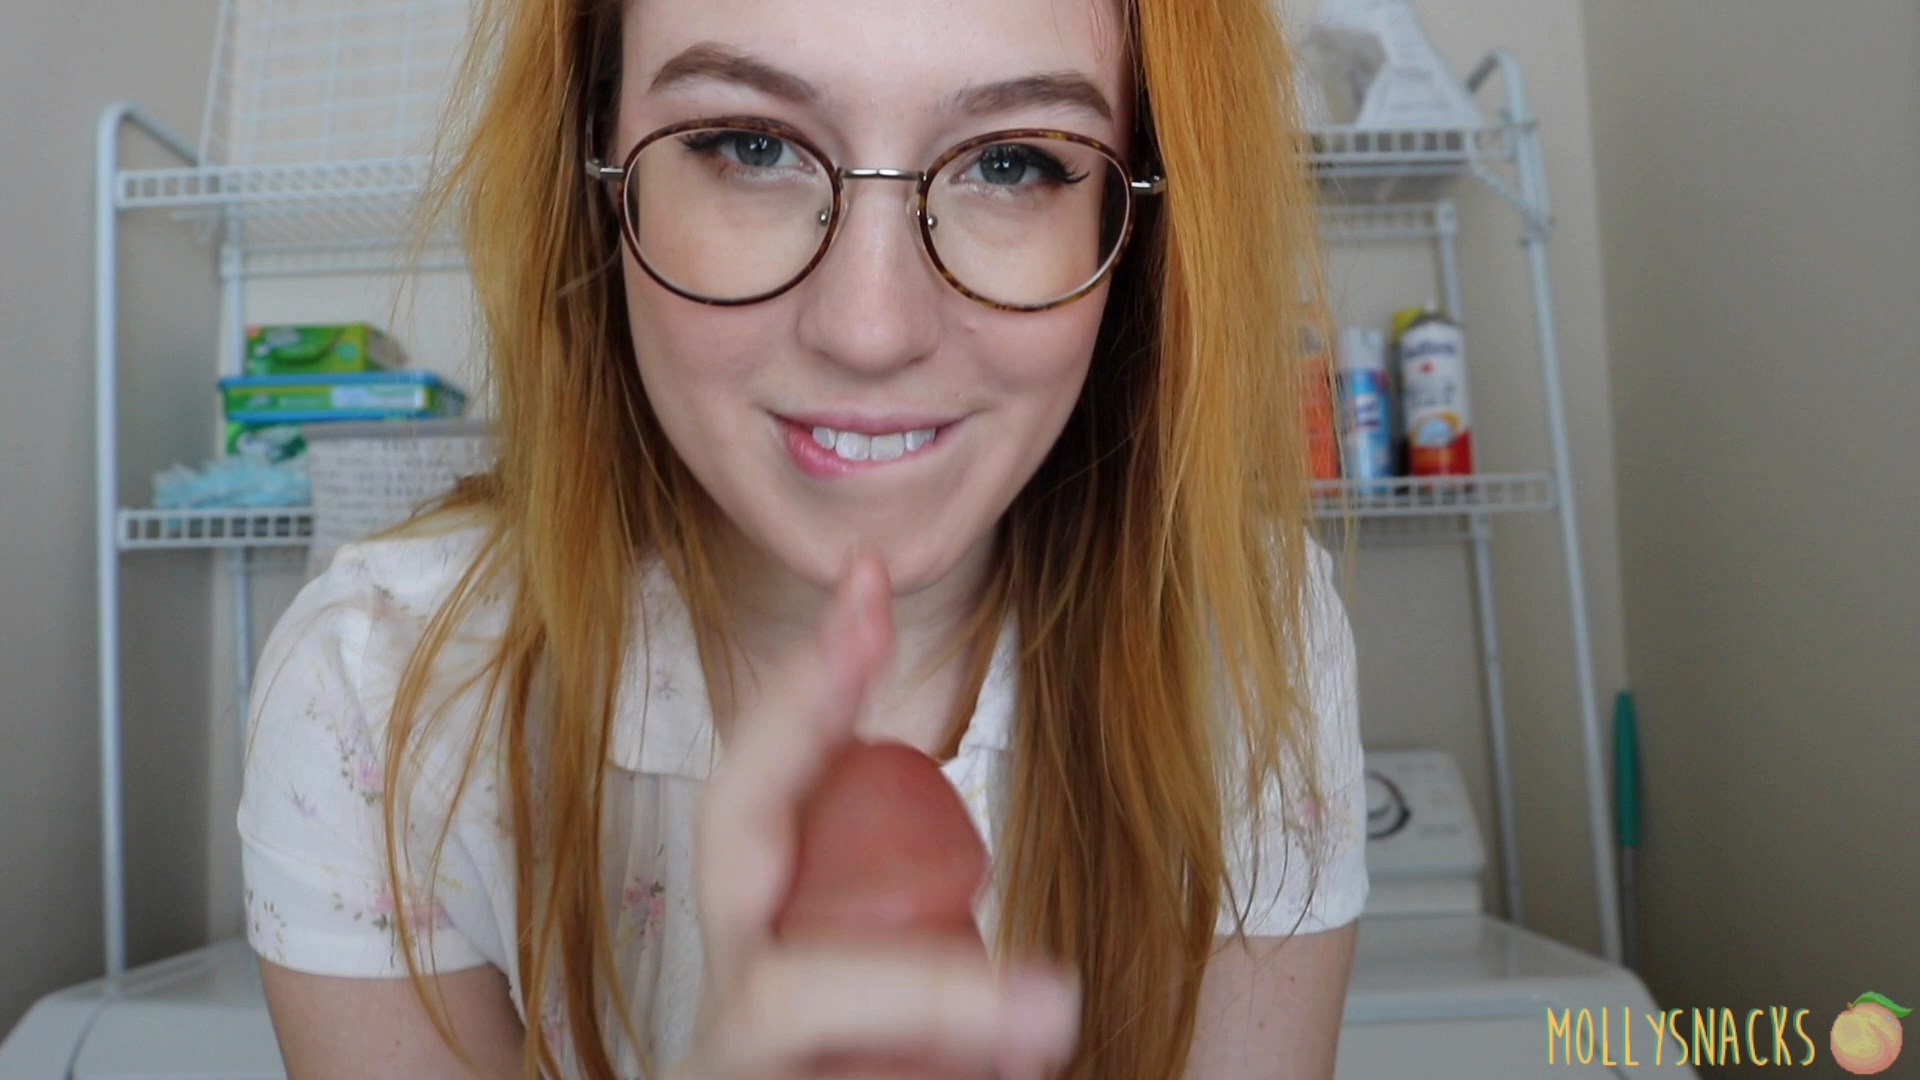 Molly Snacks - Mommy Makes You Cum